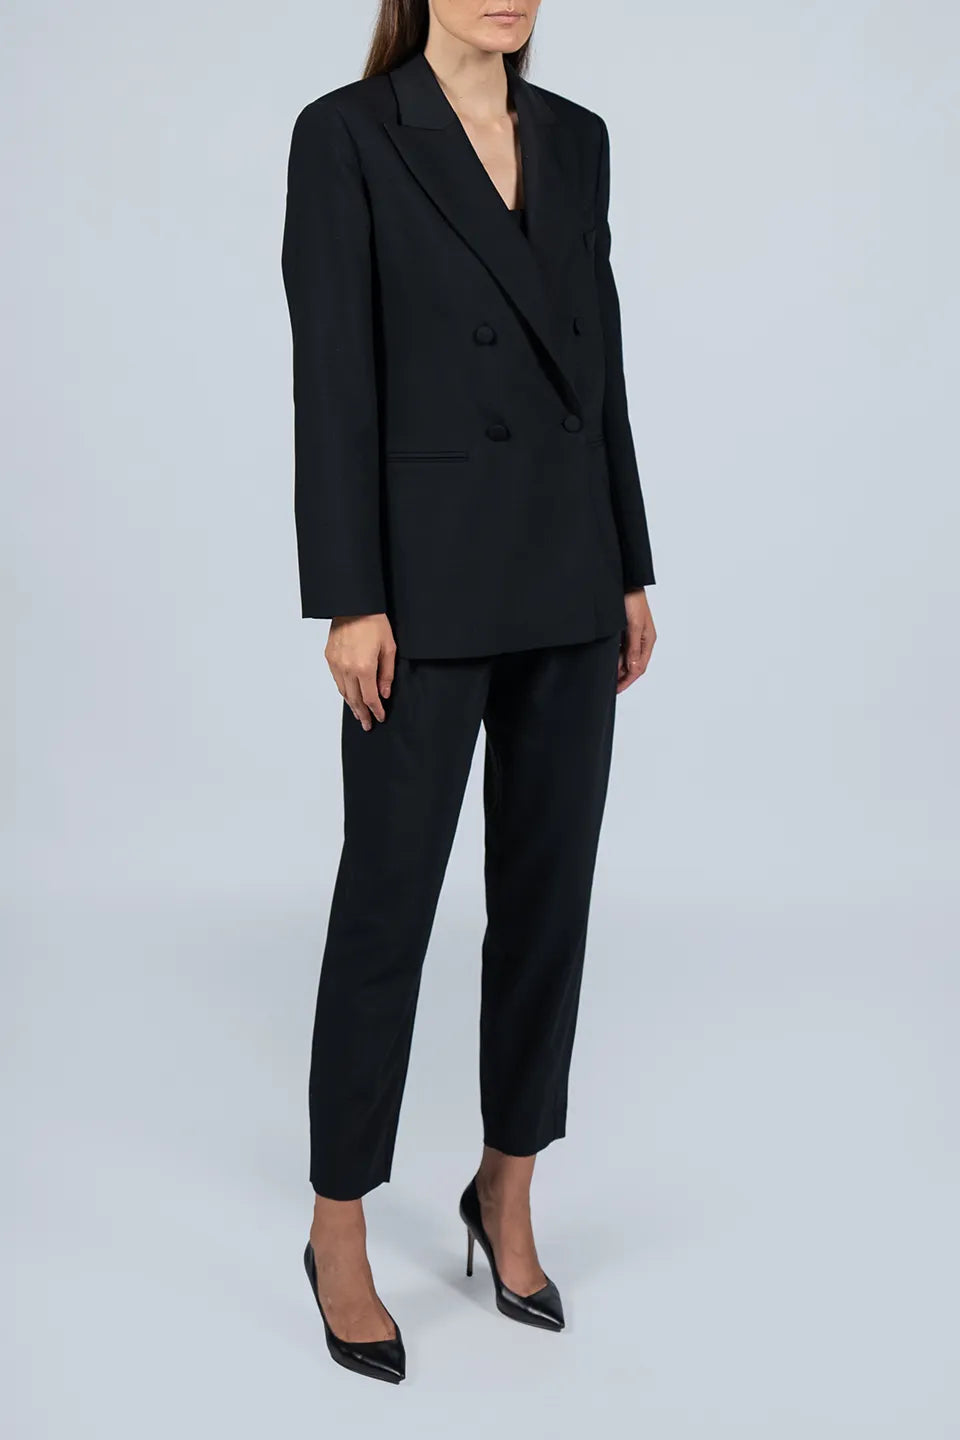 Designer Black Women blazers, Jacket, shop online with free delivery in UAE. Product gallery 3